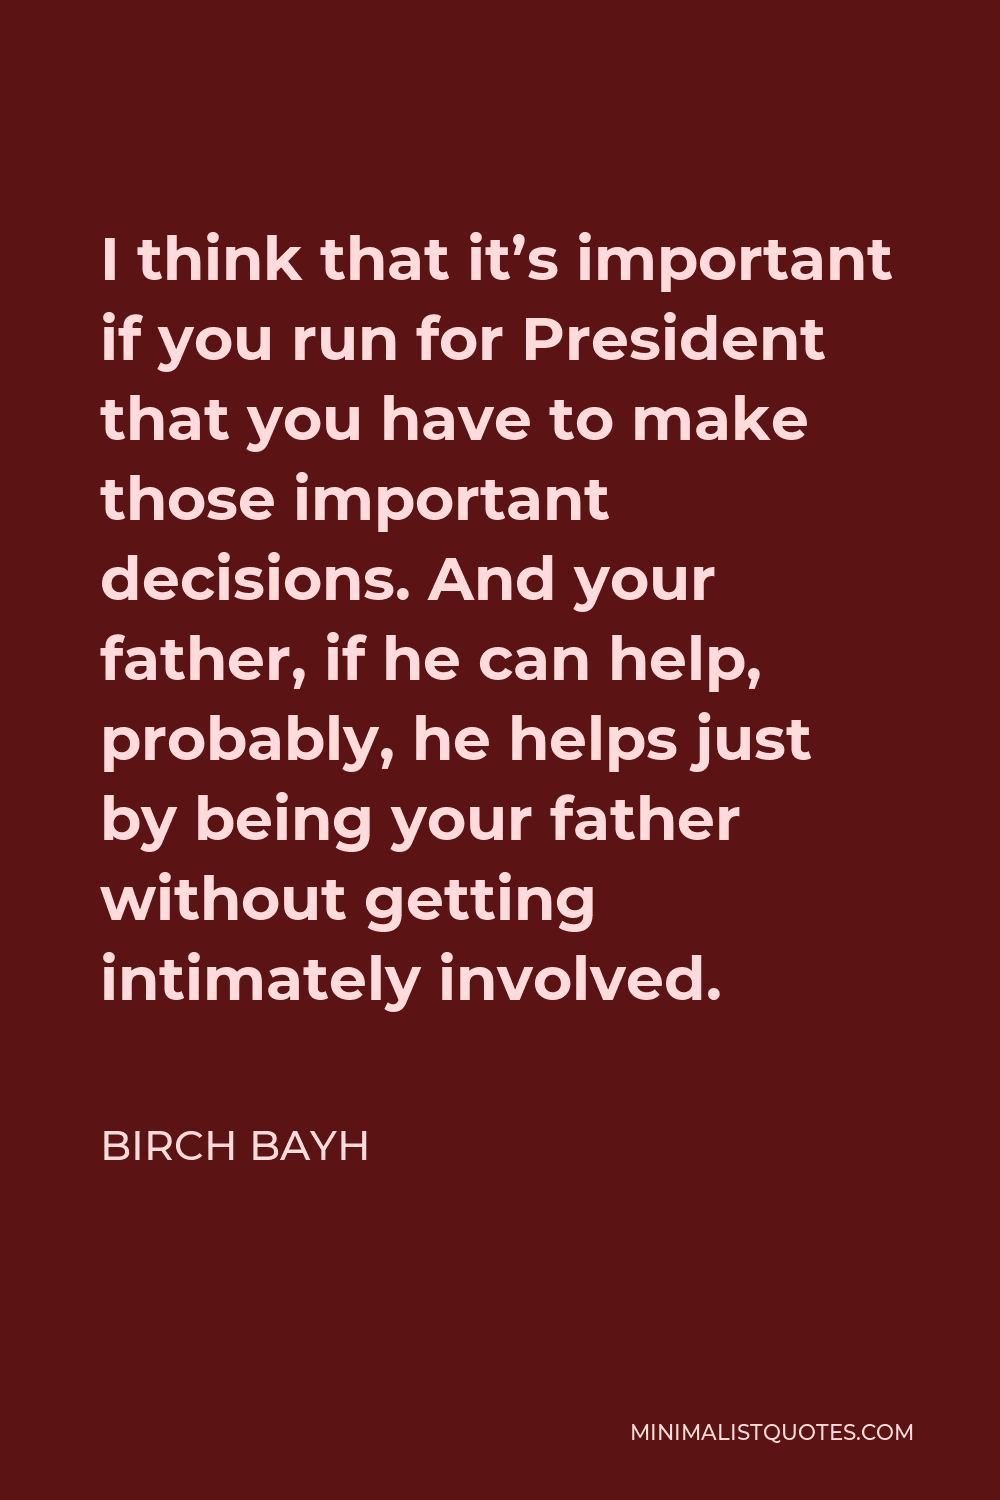 Birch Bayh Quote - I think that it’s important if you run for President that you have to make those important decisions. And your father, if he can help, probably, he helps just by being your father without getting intimately involved.